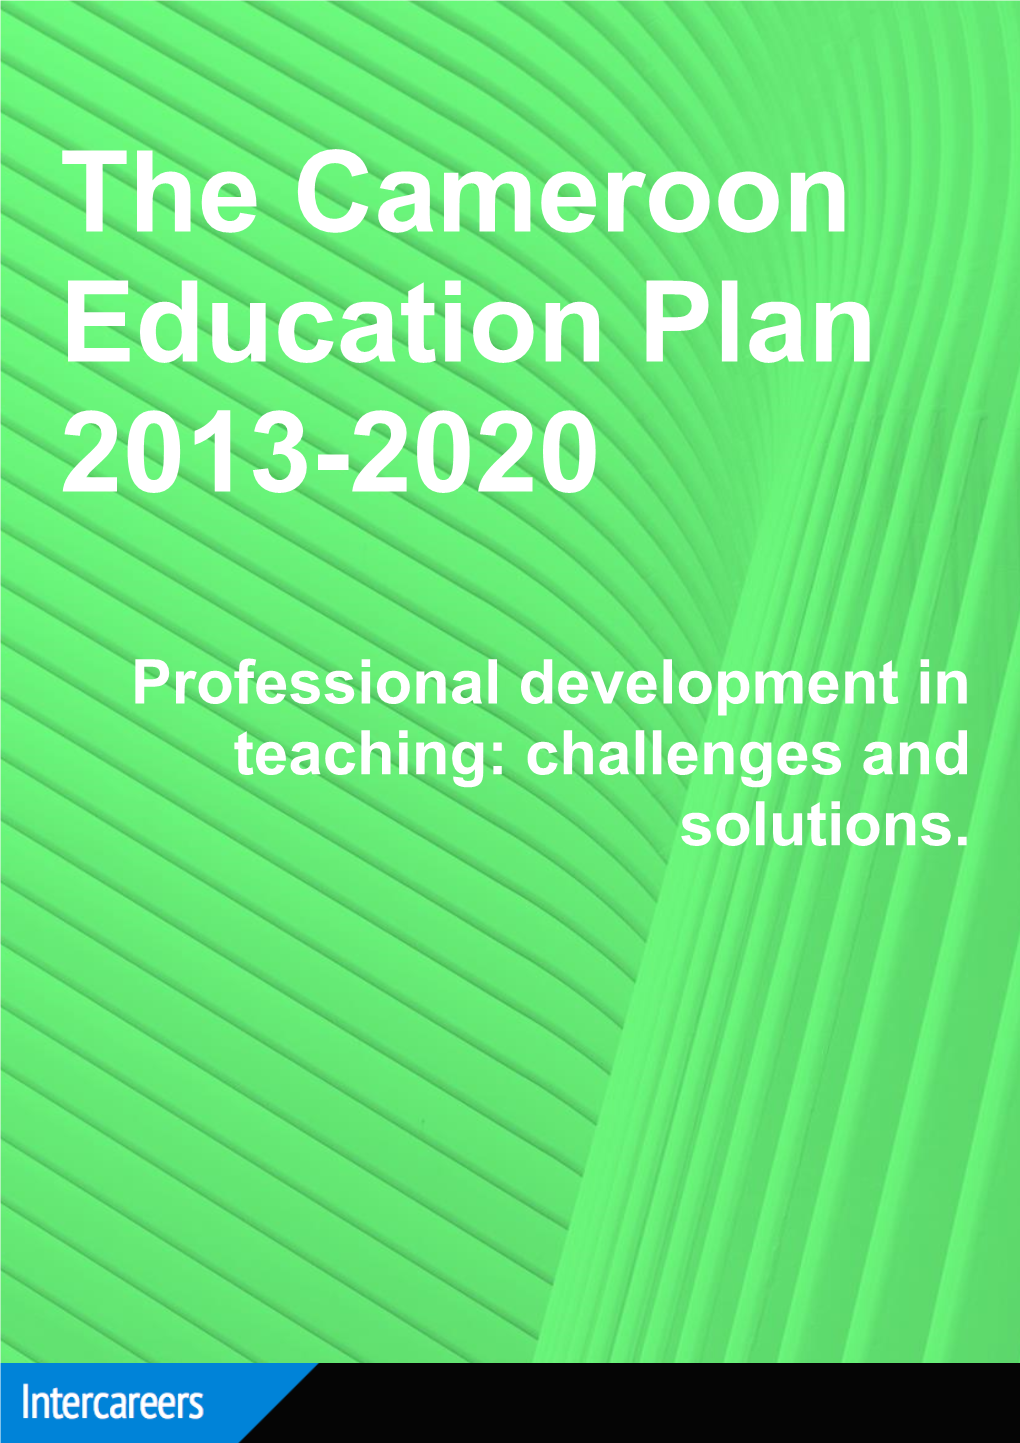 The Cameroon Education Plan 2013-2020 Professional Development in Teaching: Challenges and Solutions